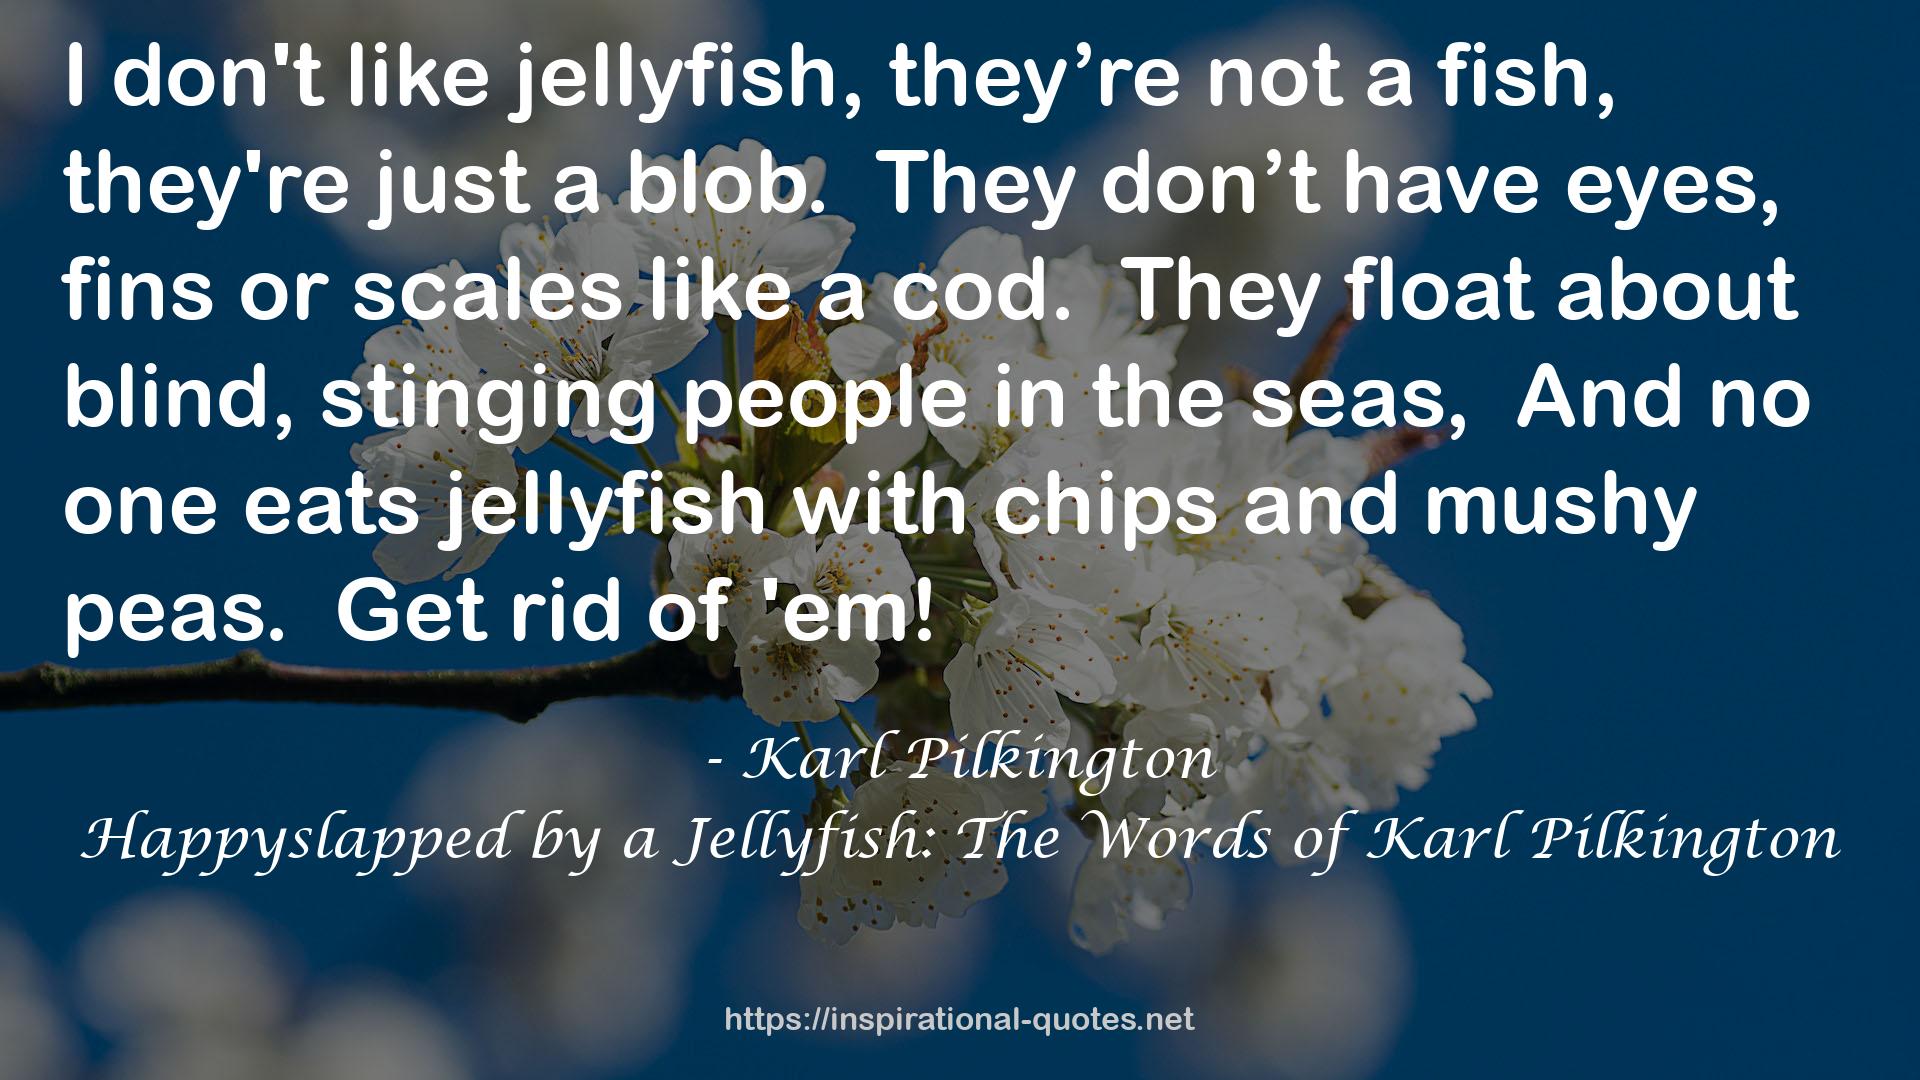 Happyslapped by a Jellyfish: The Words of Karl Pilkington QUOTES